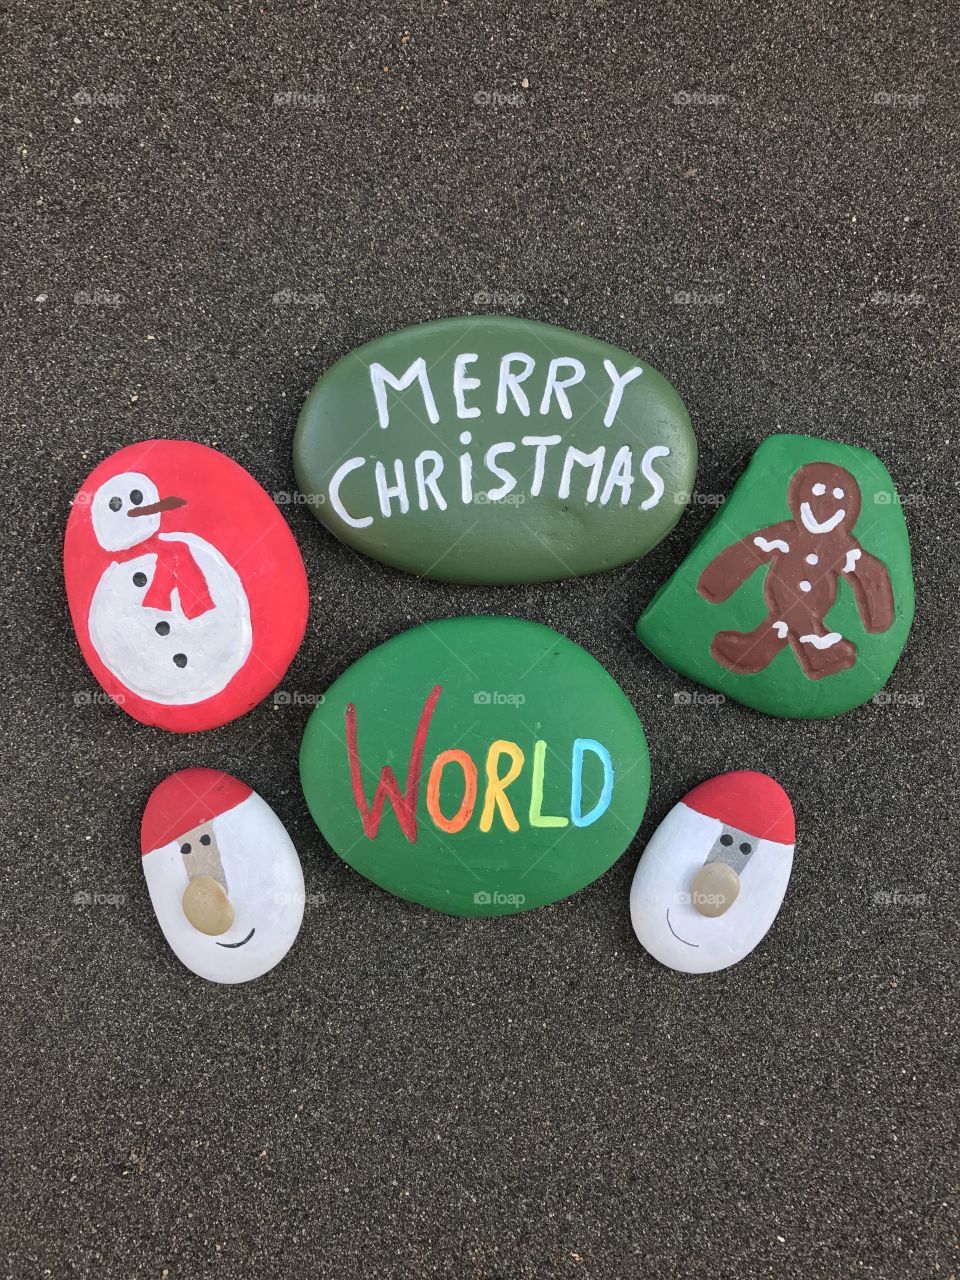 Merry Christmas World with stone design 